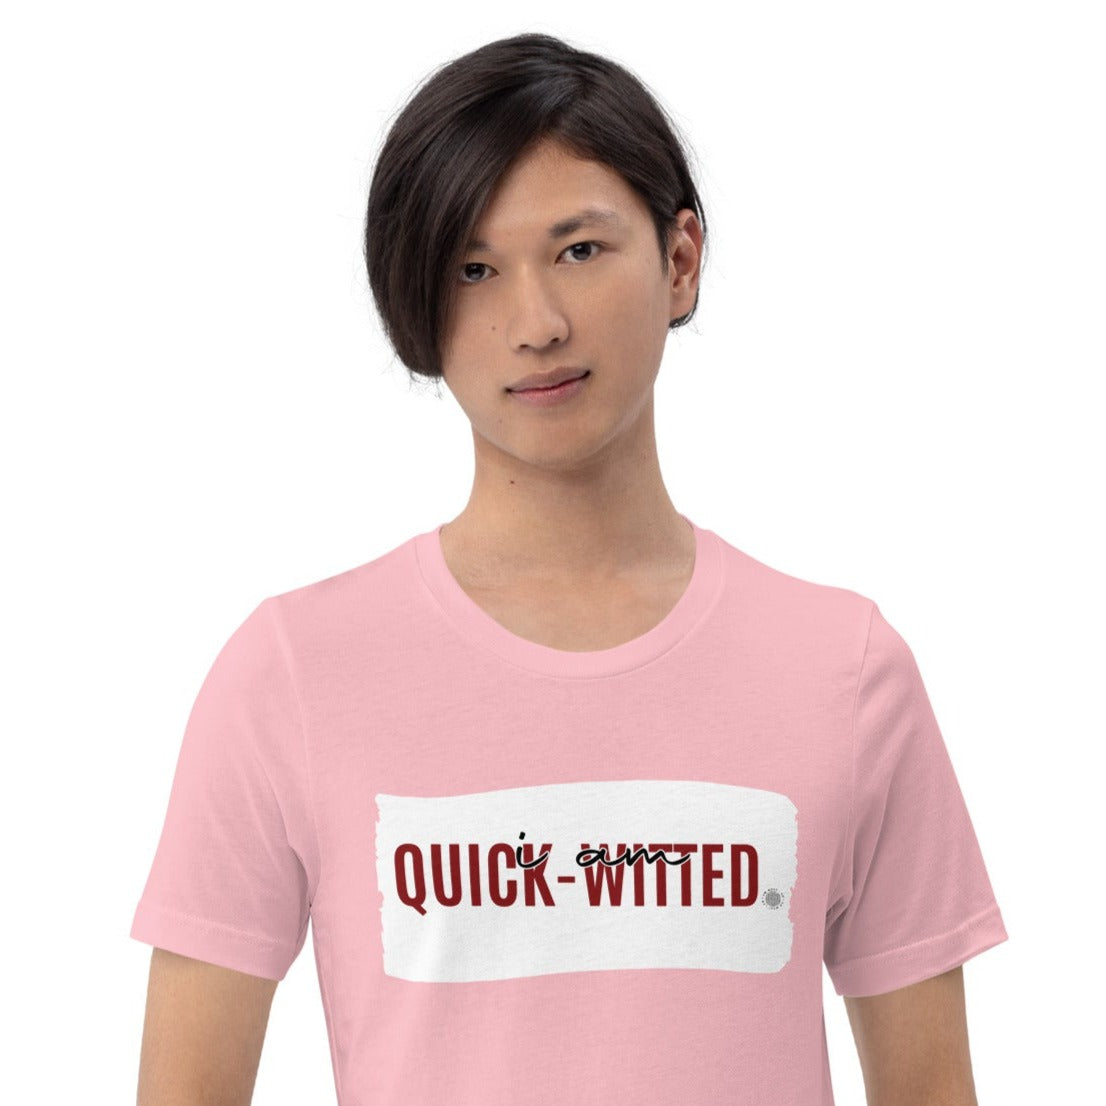 I Am Quick-witted Adult Unisex T-Shirt pink